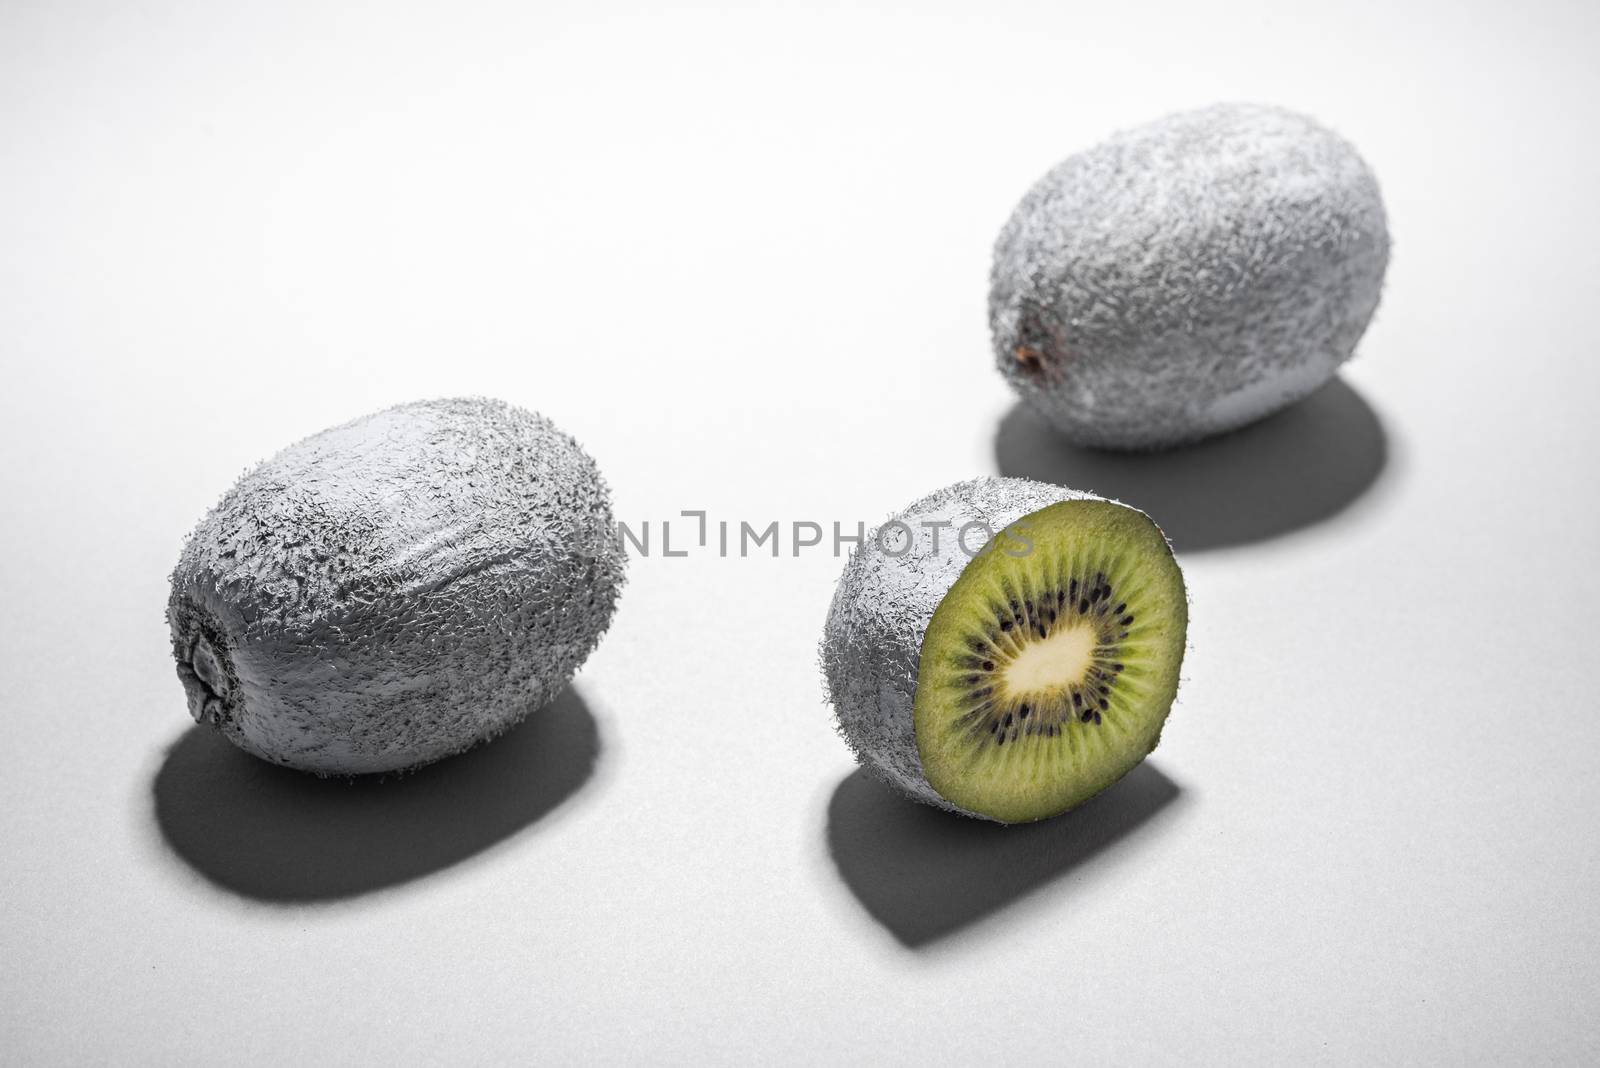 Modern Food Design. Monochrome Painted Kiwi Fruit Whole and Cut. Abstract Food Background.